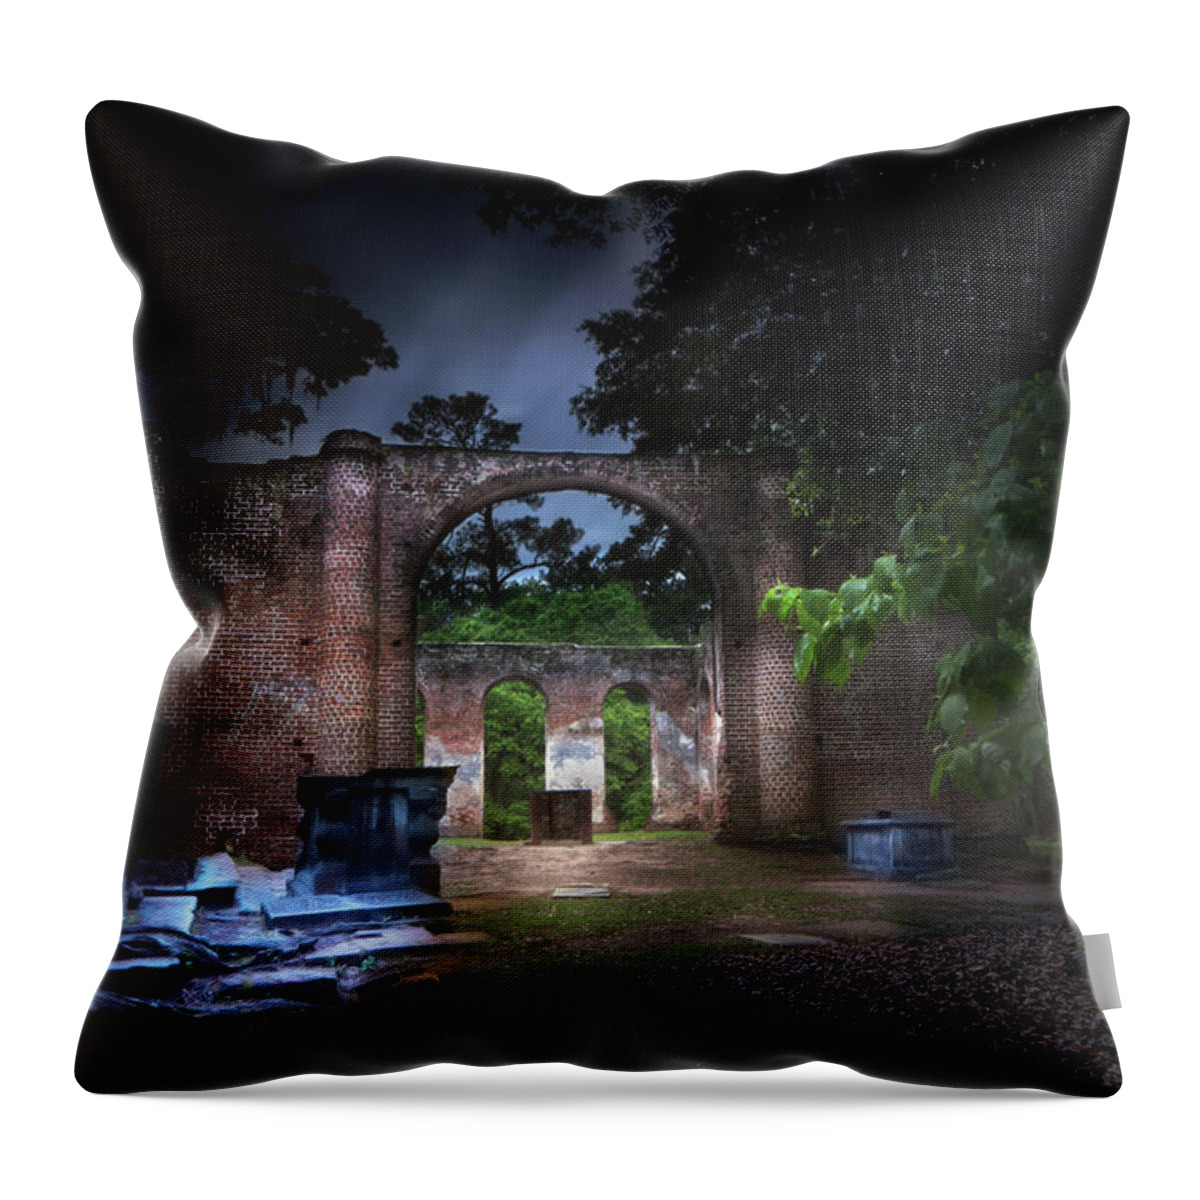 Old Sheldon Church Throw Pillow featuring the photograph Old Sheldon Graveyard by Mark Andrew Thomas